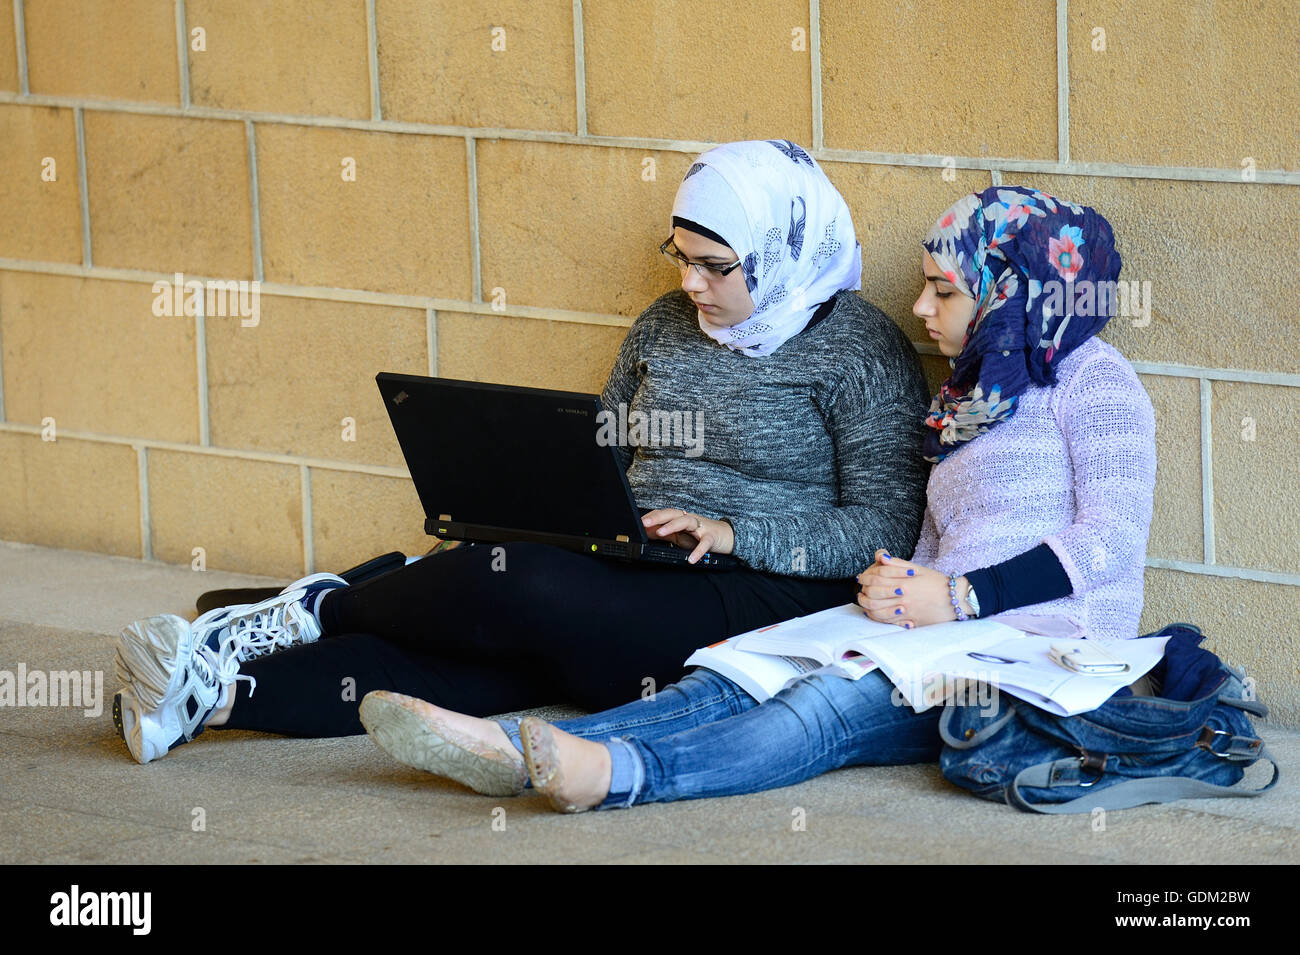 Lebanon, Beirut(LF)Students at the campus of the American University of Beirut (AUB)(LF)The AUB is a private, secular, and independent university with 8000 students. Founded in 1866 as the first American university located outside the U.S.A, it is ranked Stock Photo